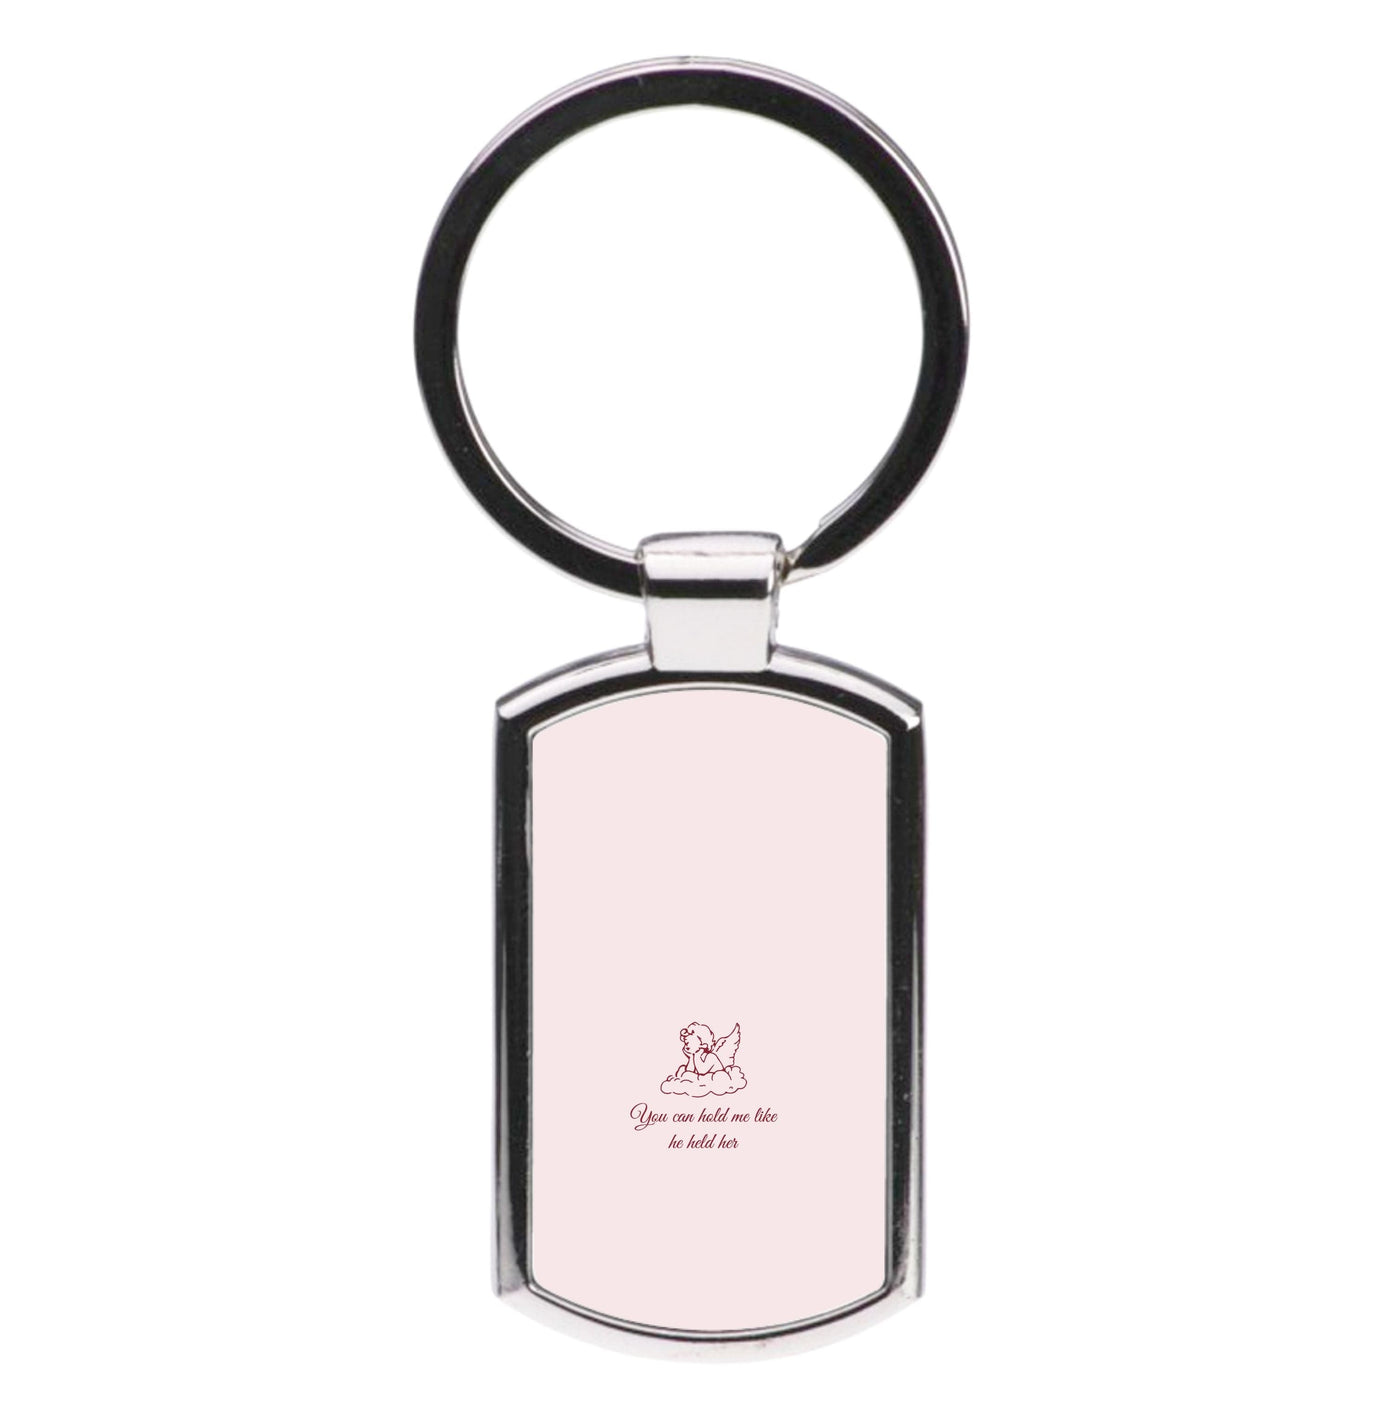 You Can Hold Me Like He Held Her - Festival Luxury Keyring